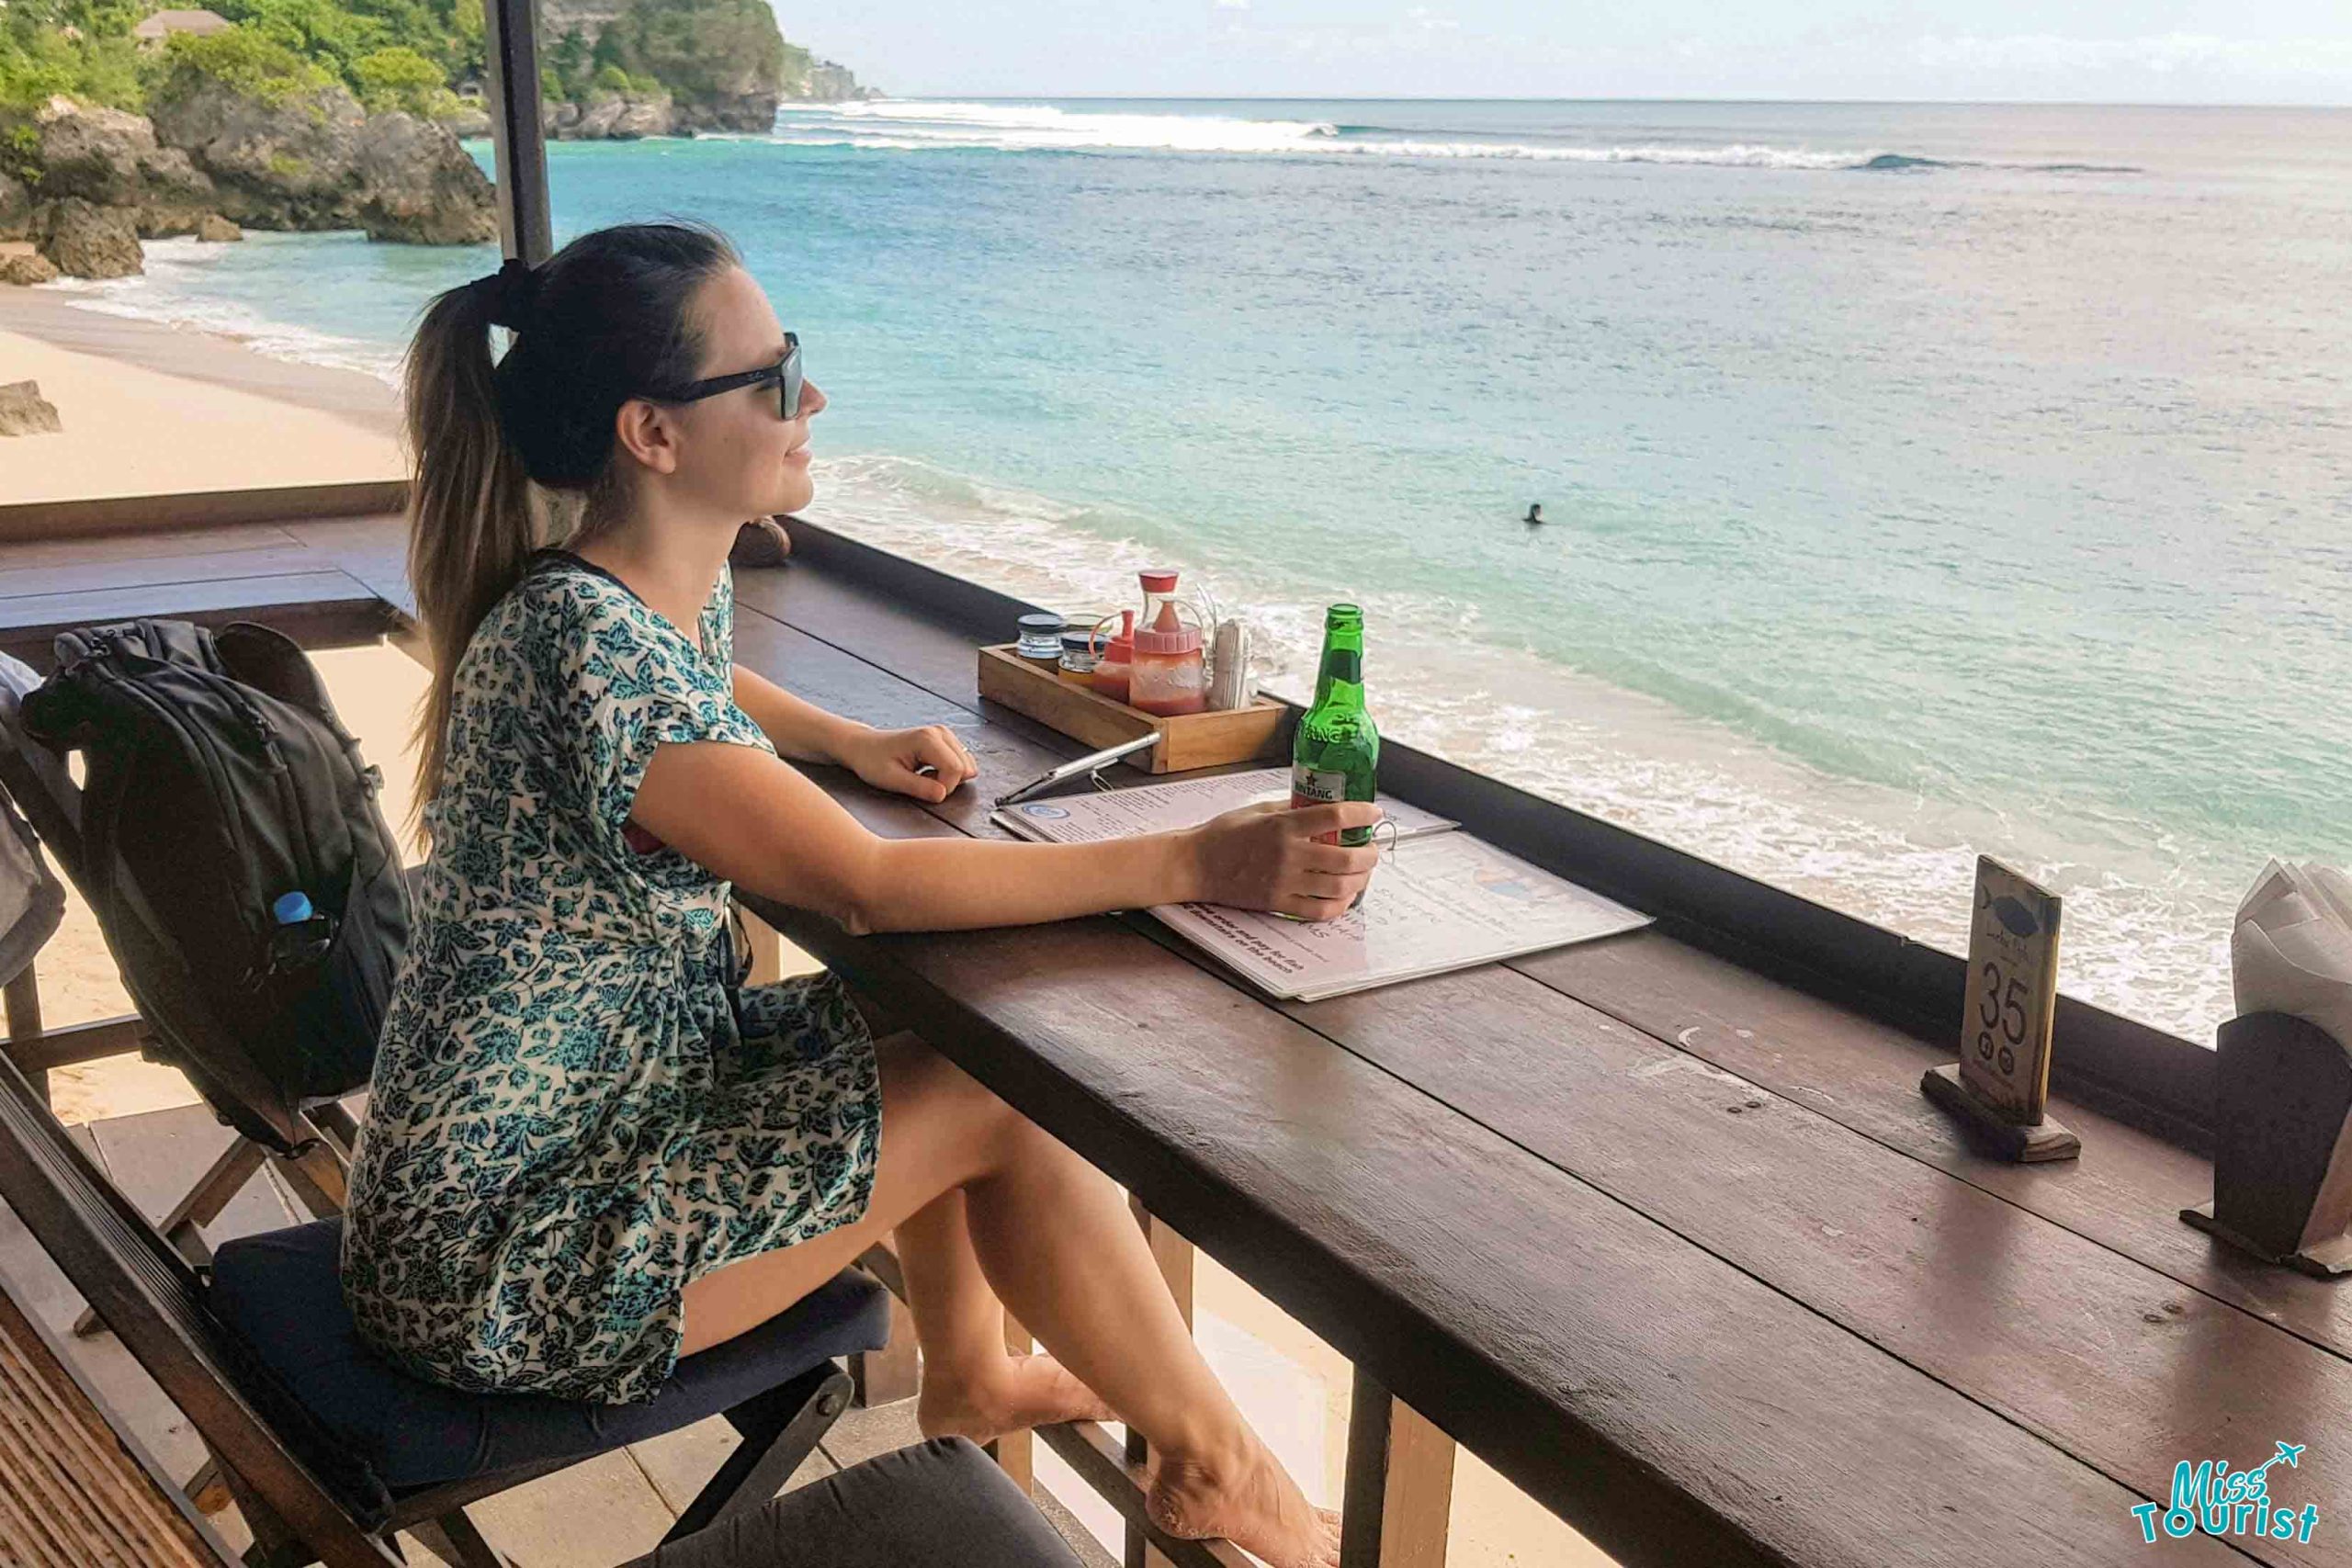 Yulia, author of the post, in a blue printed dress and sunglasses sits at a beachside bar, gazing out at the clear turquoise sea and surfers riding waves, with a beer and menu on the table, embodying a relaxed dining experience in Canggu